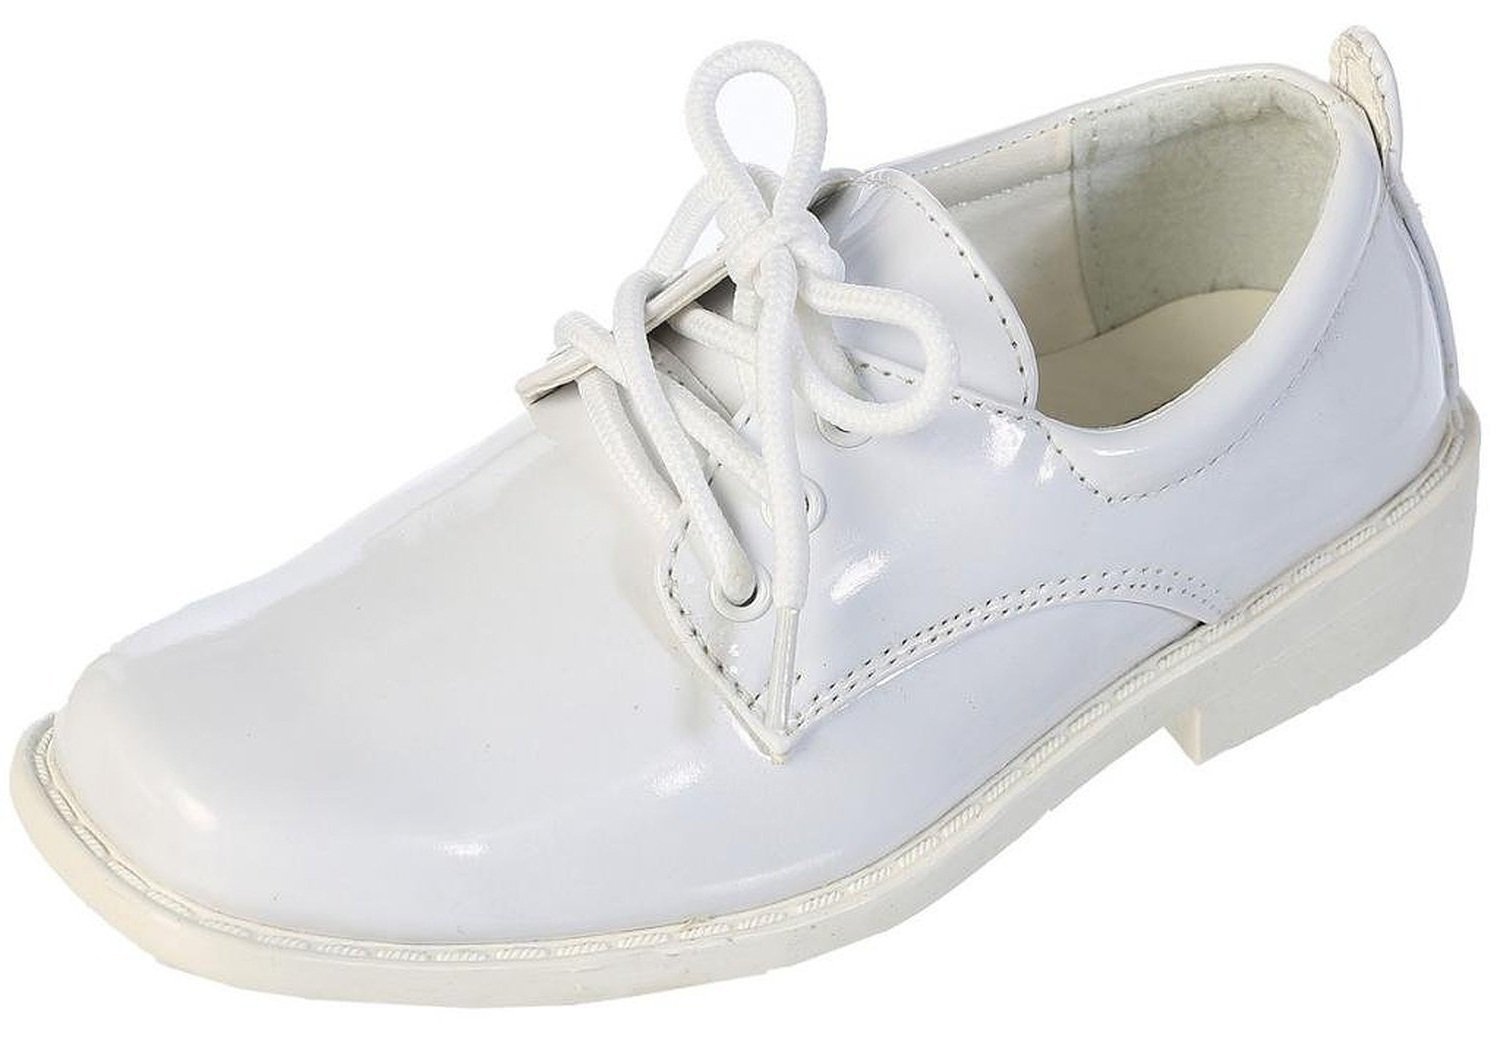 Boys Square Toe Lace Up Oxford Patent Dress Shoes - Available in White 7 Toddler